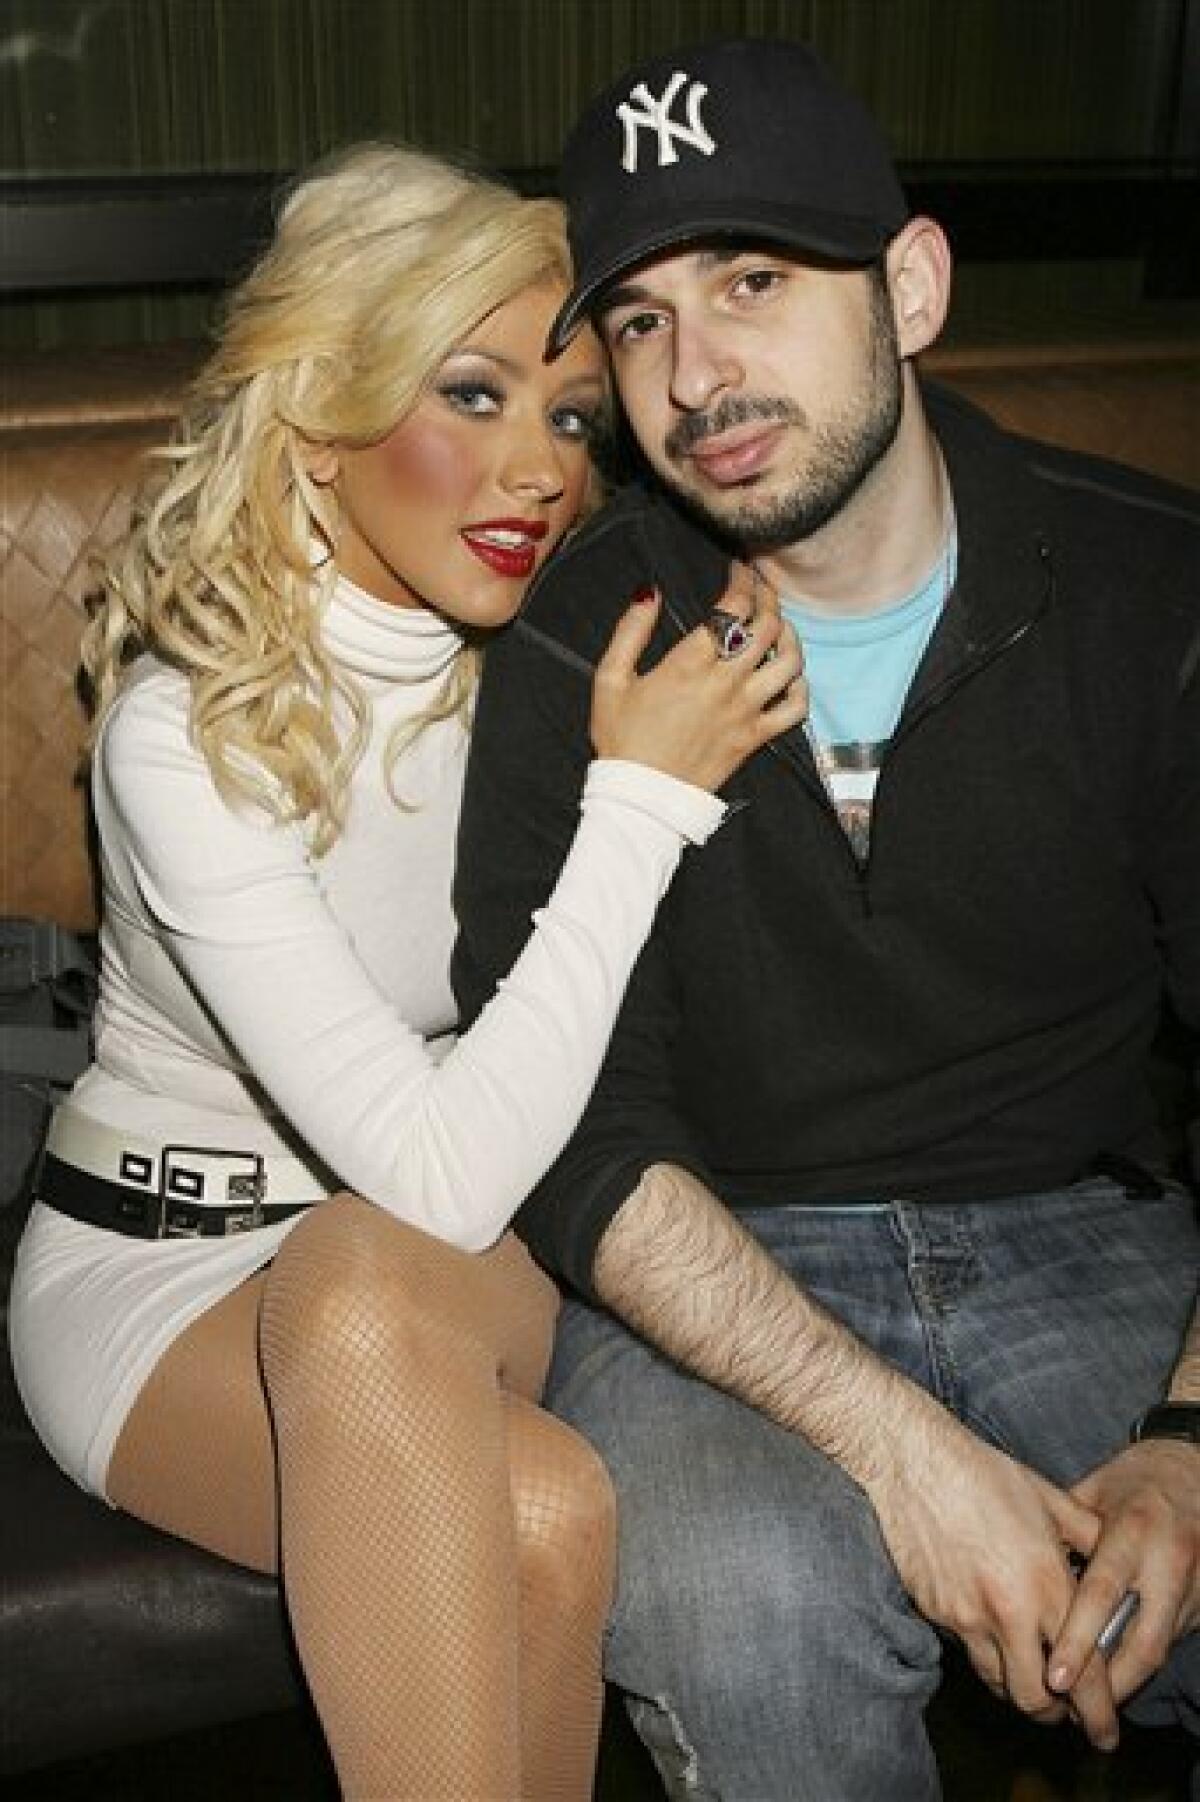 FILE - In this March 23, 2007 file photo originally provided by Starpix, singer Christina Aguilera and her husband Jordan Bratman attend a party at the Marquee club in New York. (AP Photo/Dave Allocca, Starpix, file)